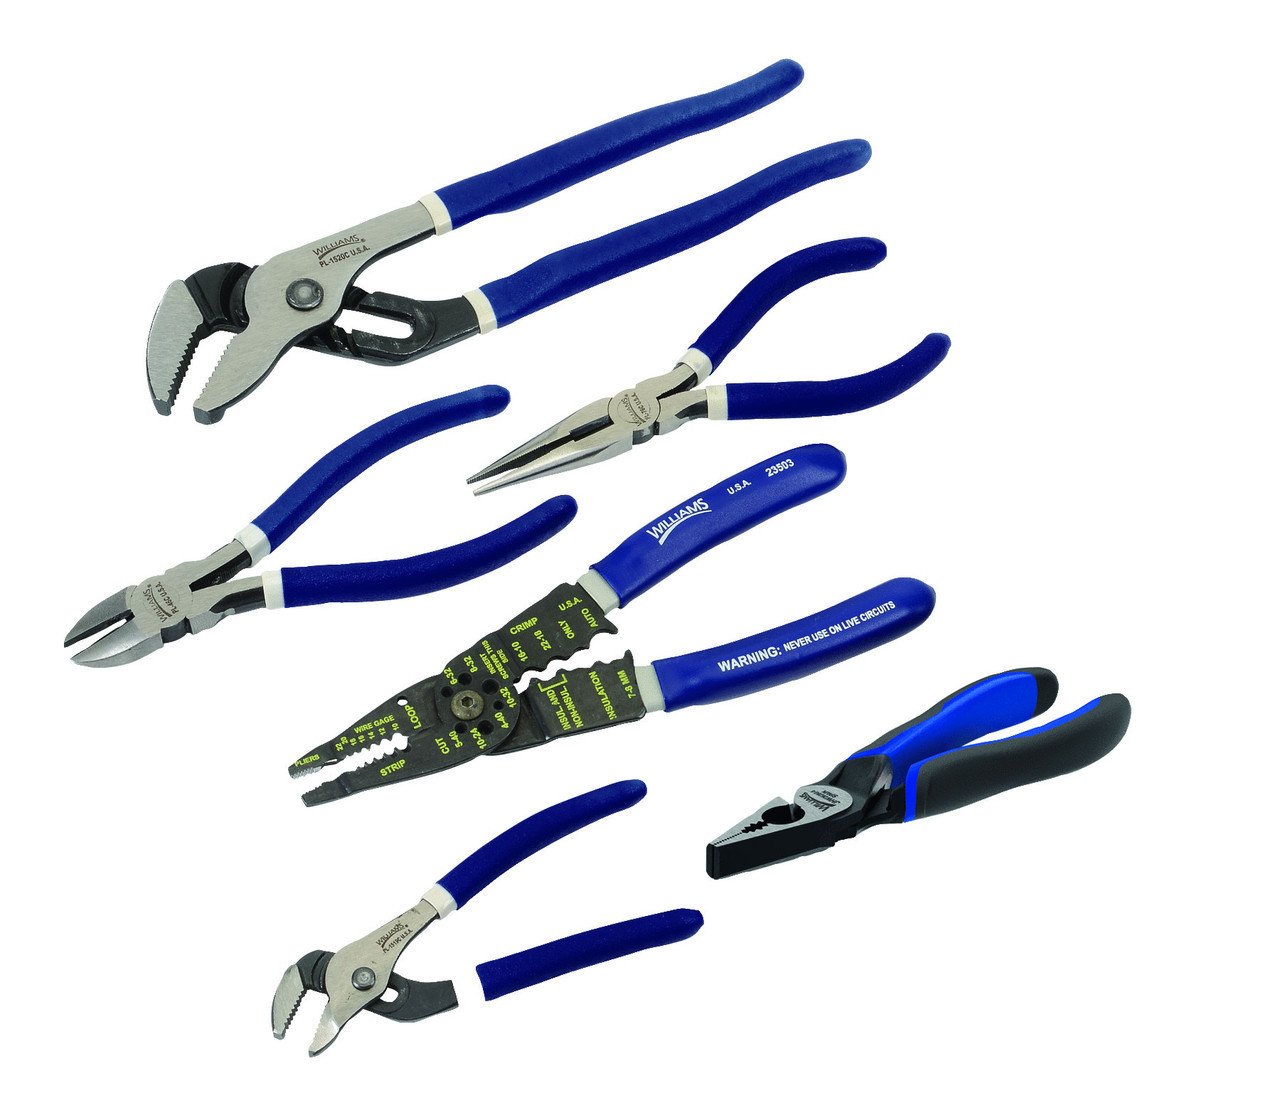 5 - 8 1/4" Williams General Service Pliers with Double-Dipped Plastic Handle Set 6 Pcs - JHWPLS-6A